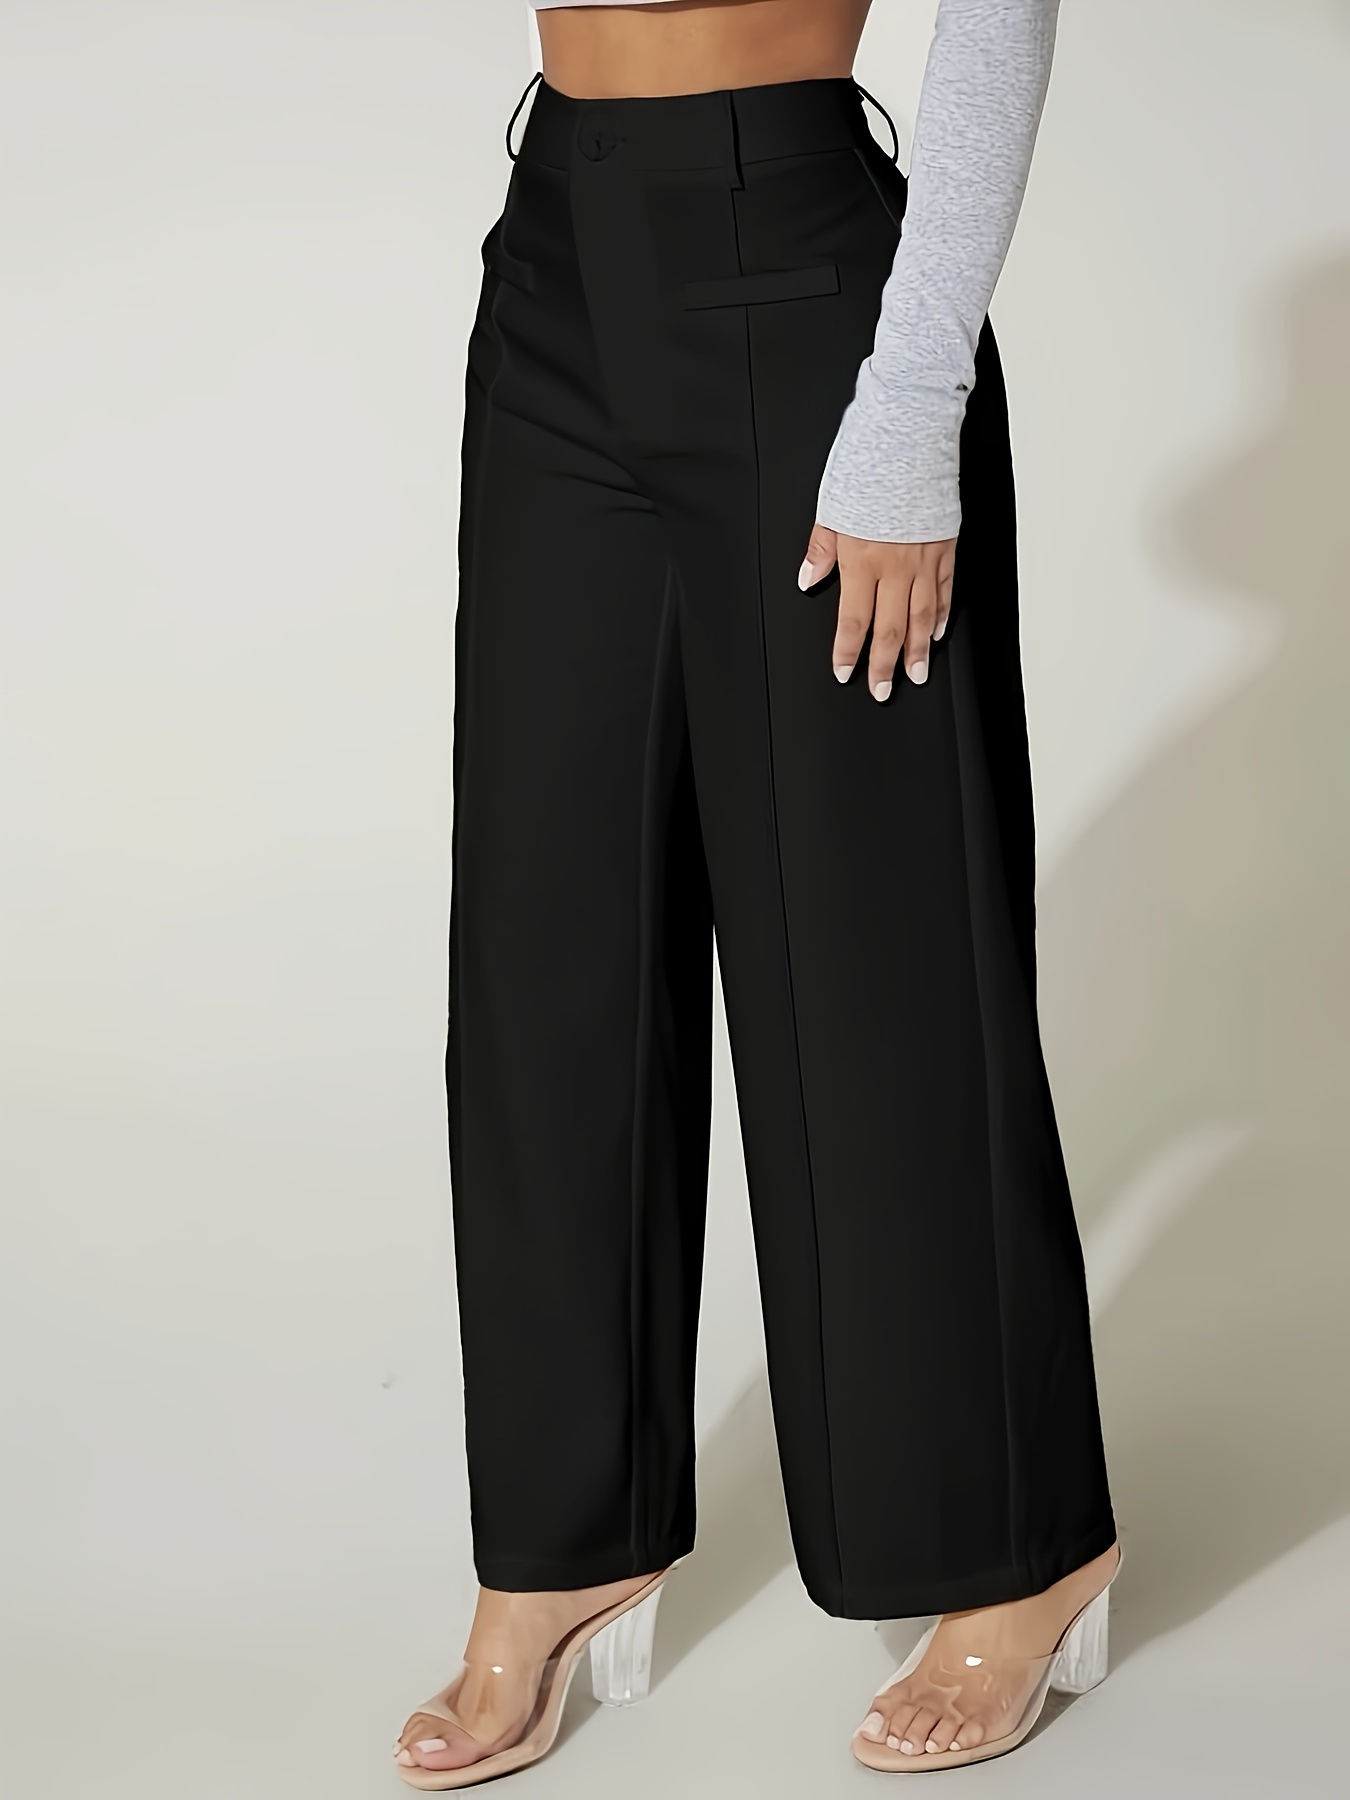 VGH Elegant Formal Pants For Women High Waist Solid Split Temperament  Straight Trousers Female Fashion Style Clothing New 2023